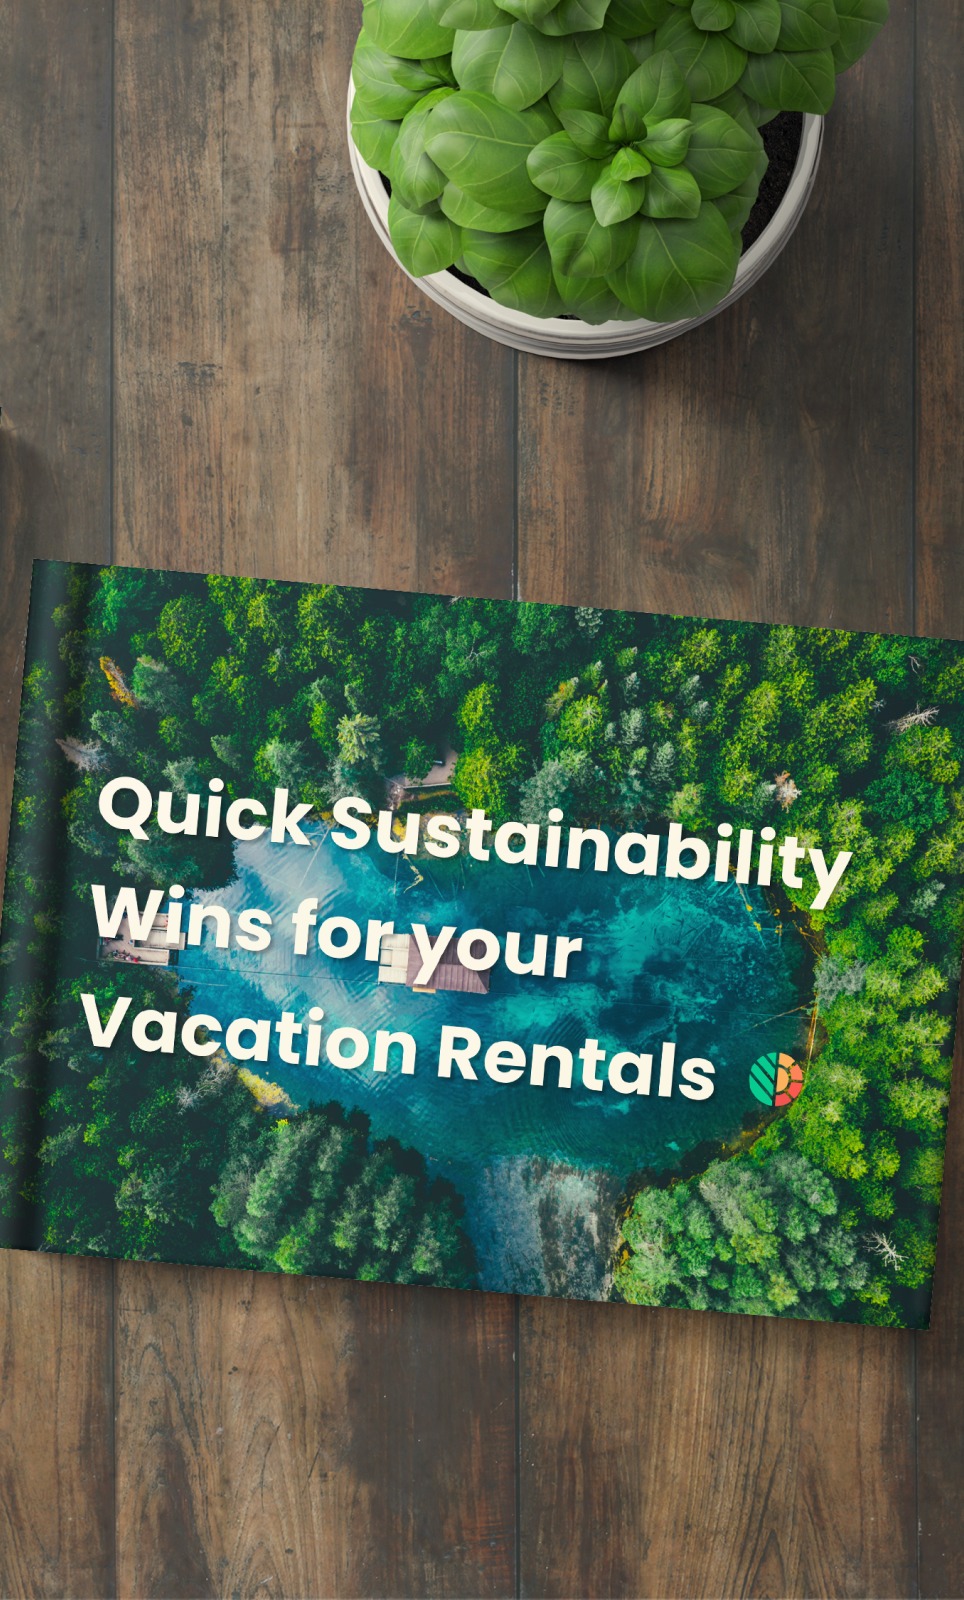 quick-sustainability-wins-vacation-rentals